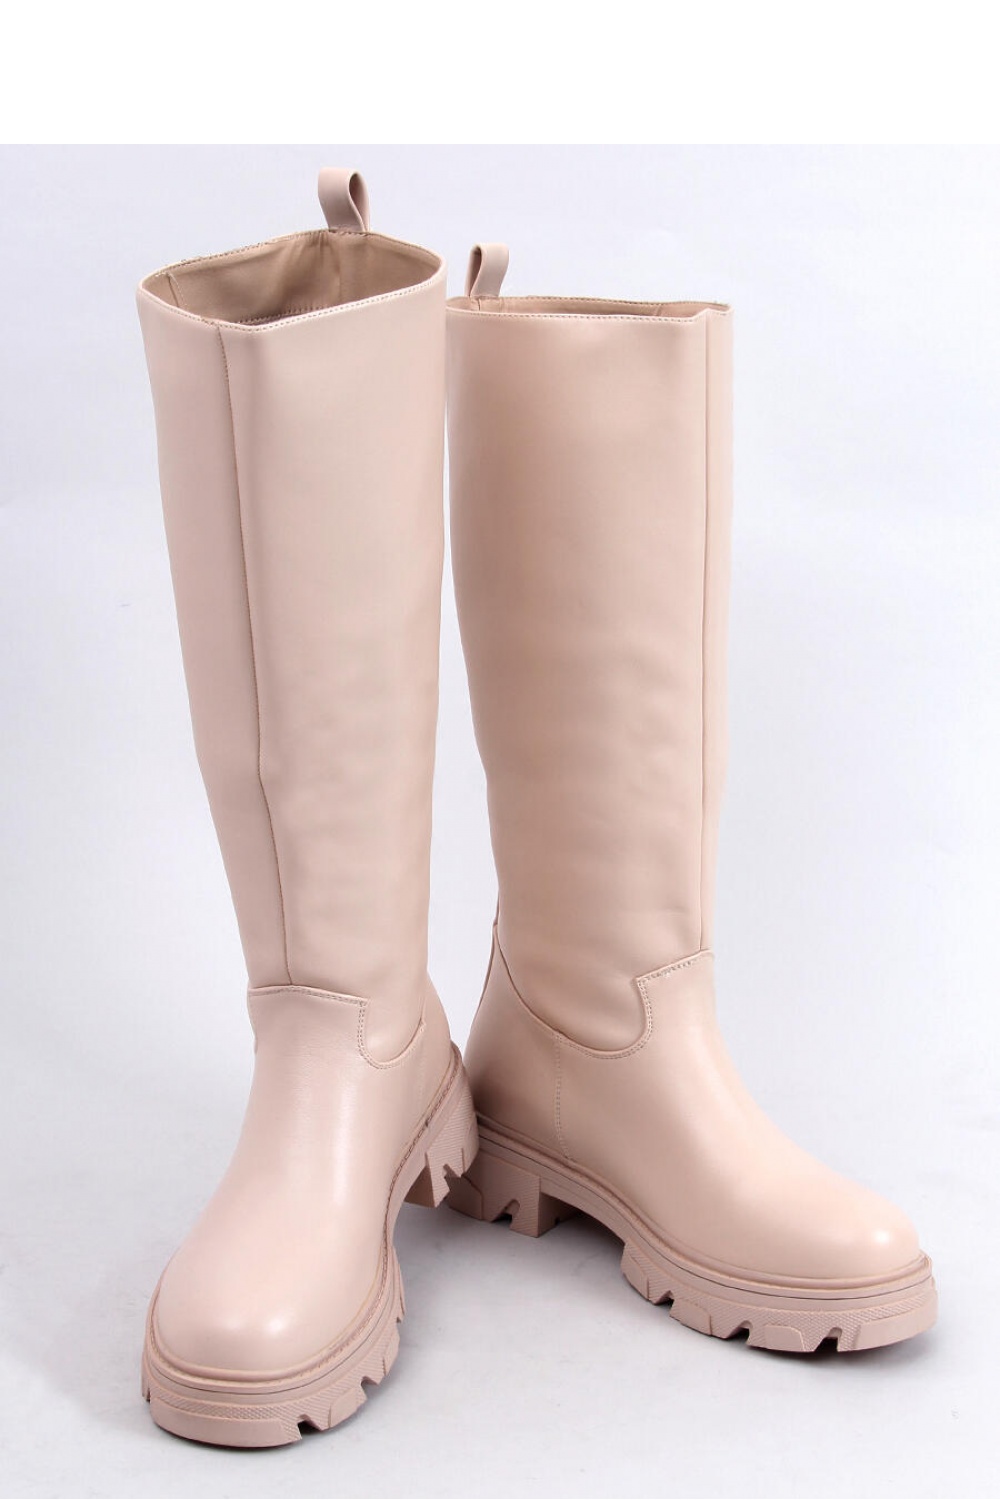  Officer boots model 171942 Inello  beige